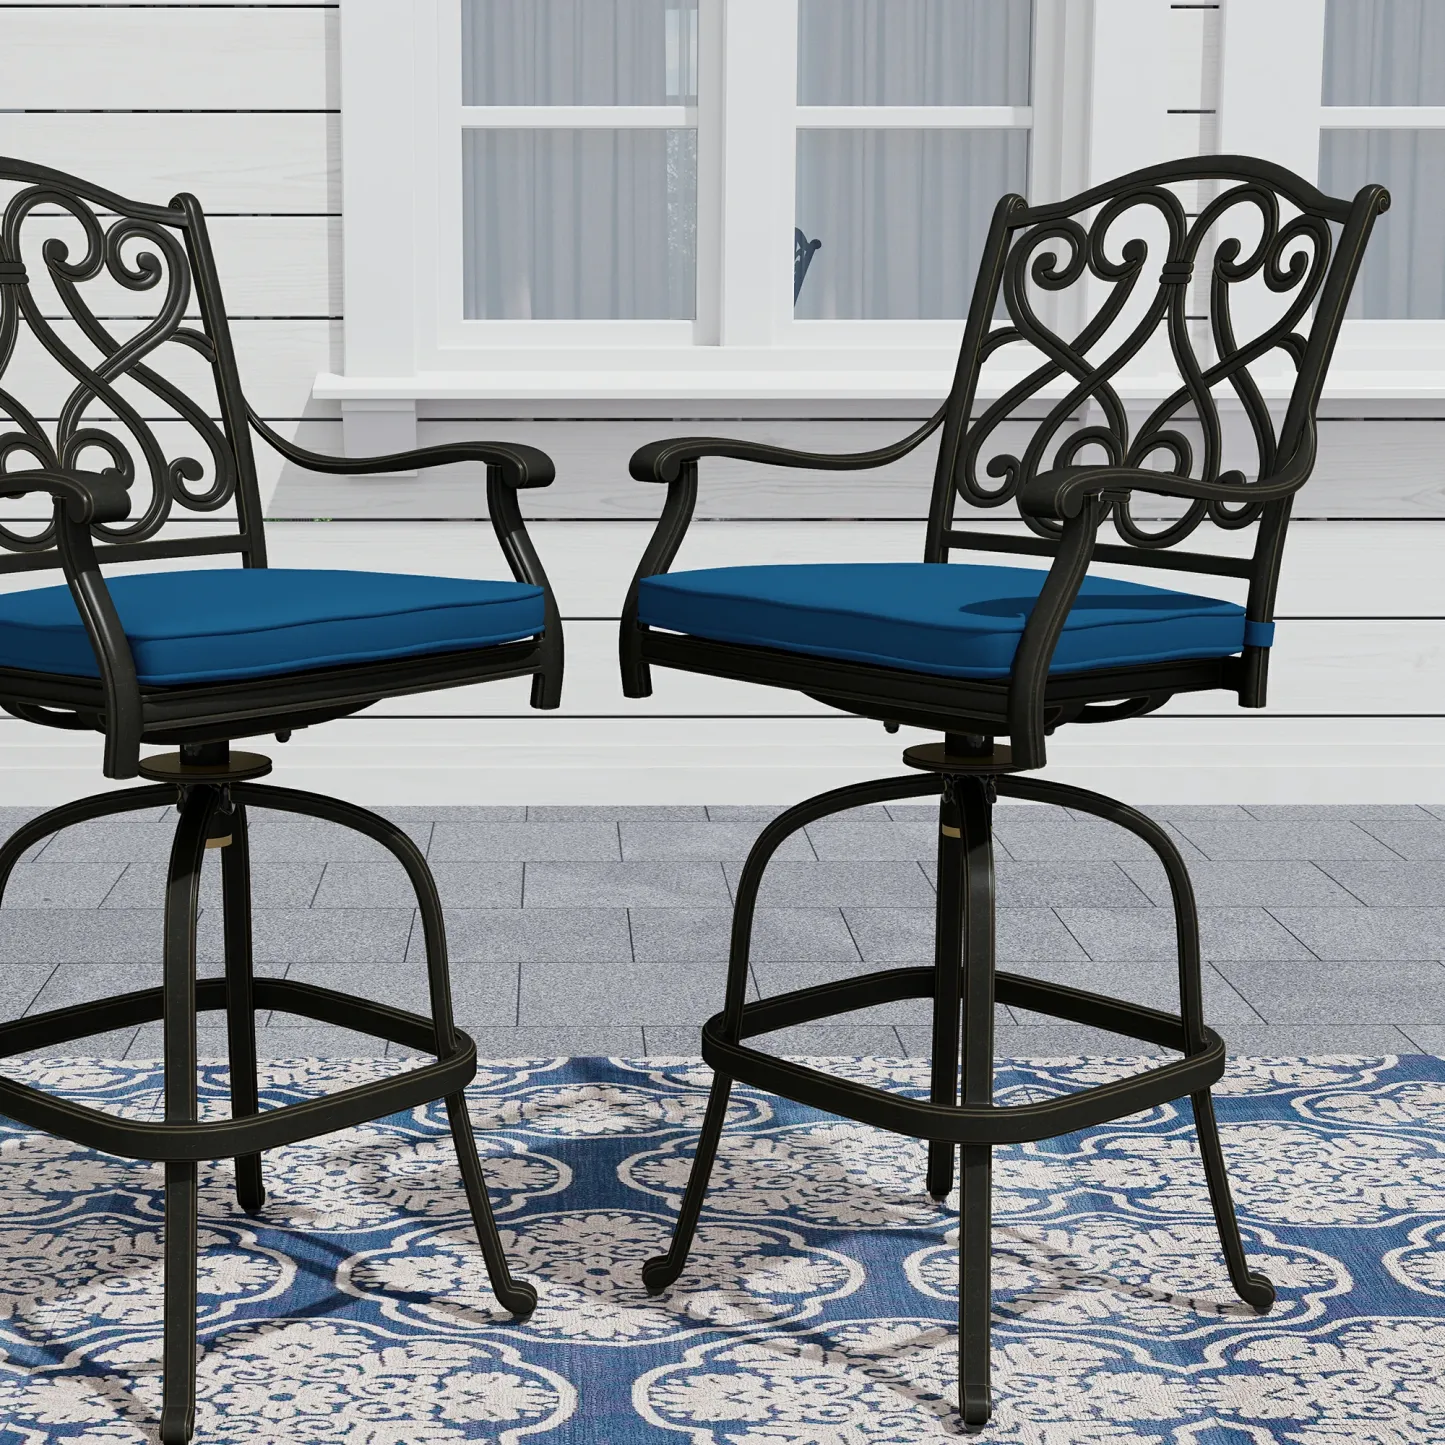 Set of 2 Patio Dining Chairs with Removable Olefin Cushion Cast Aluminum Frame 360° Swivel Bar Stool 